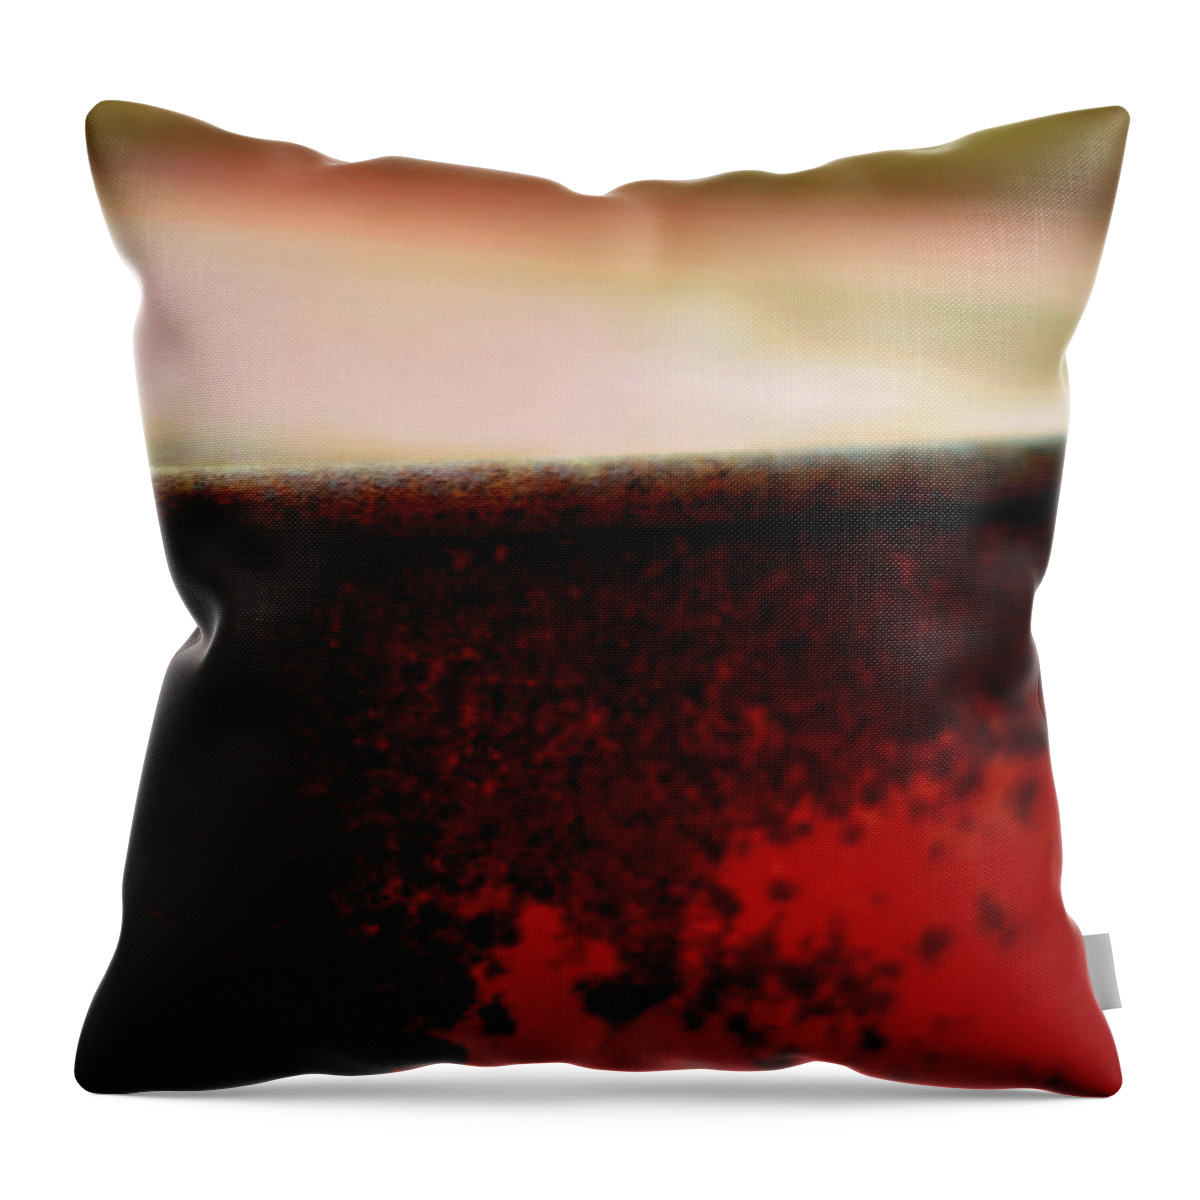 Red Throw Pillow featuring the photograph The Red Barrel by Rebecca Sherman